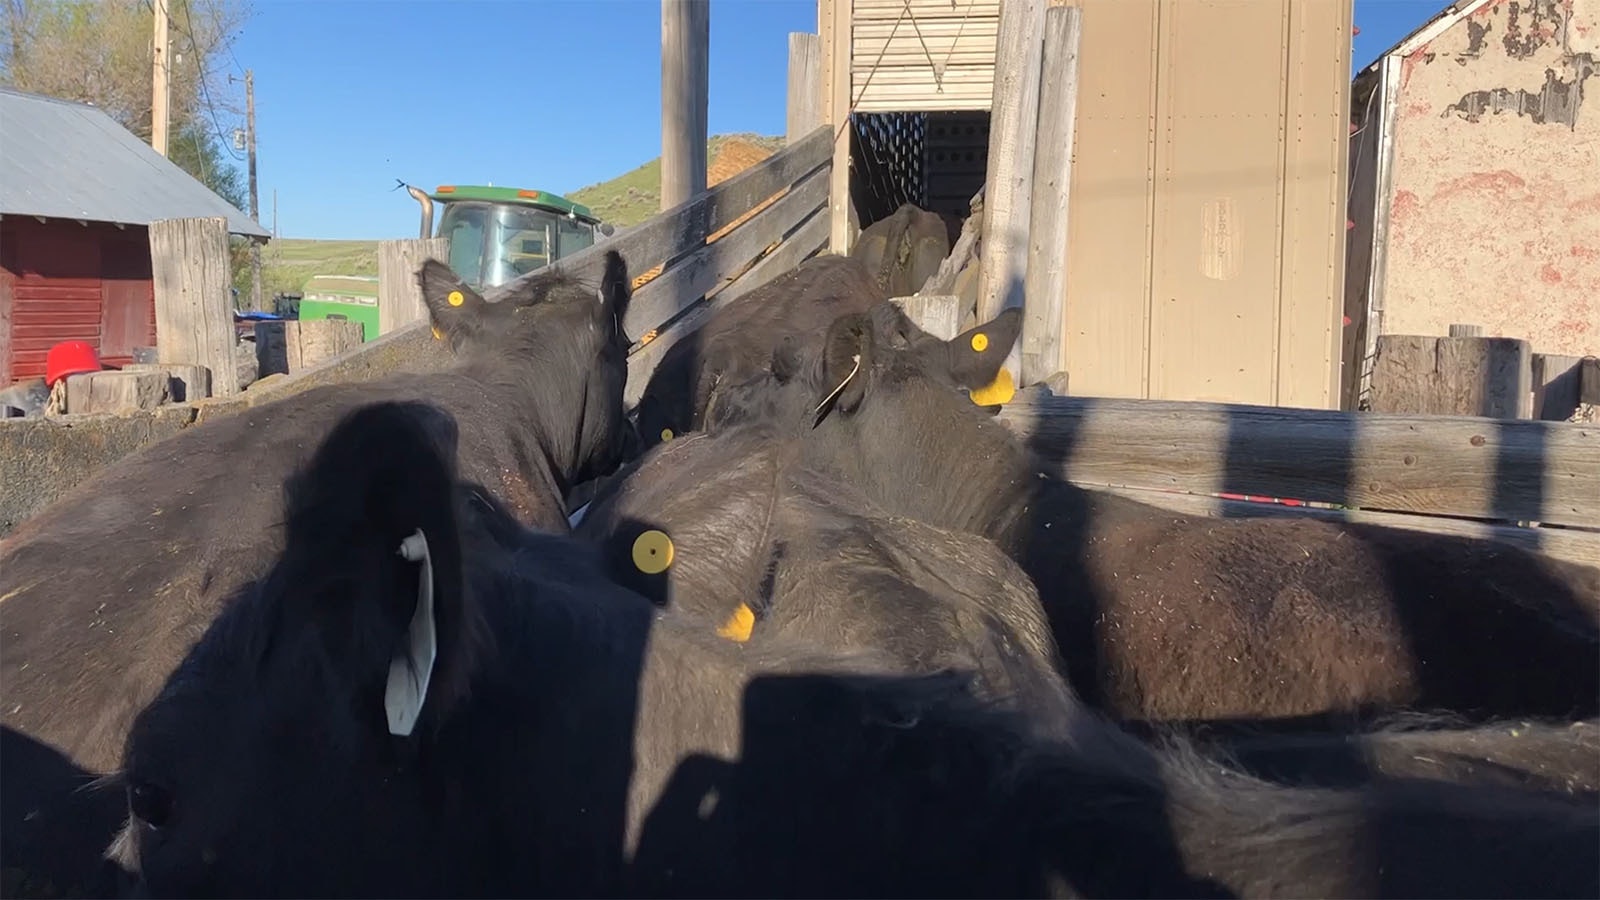 Cows are loaded into the 53-foot trailer before their mothers and are assigned to higher sections of the truck.